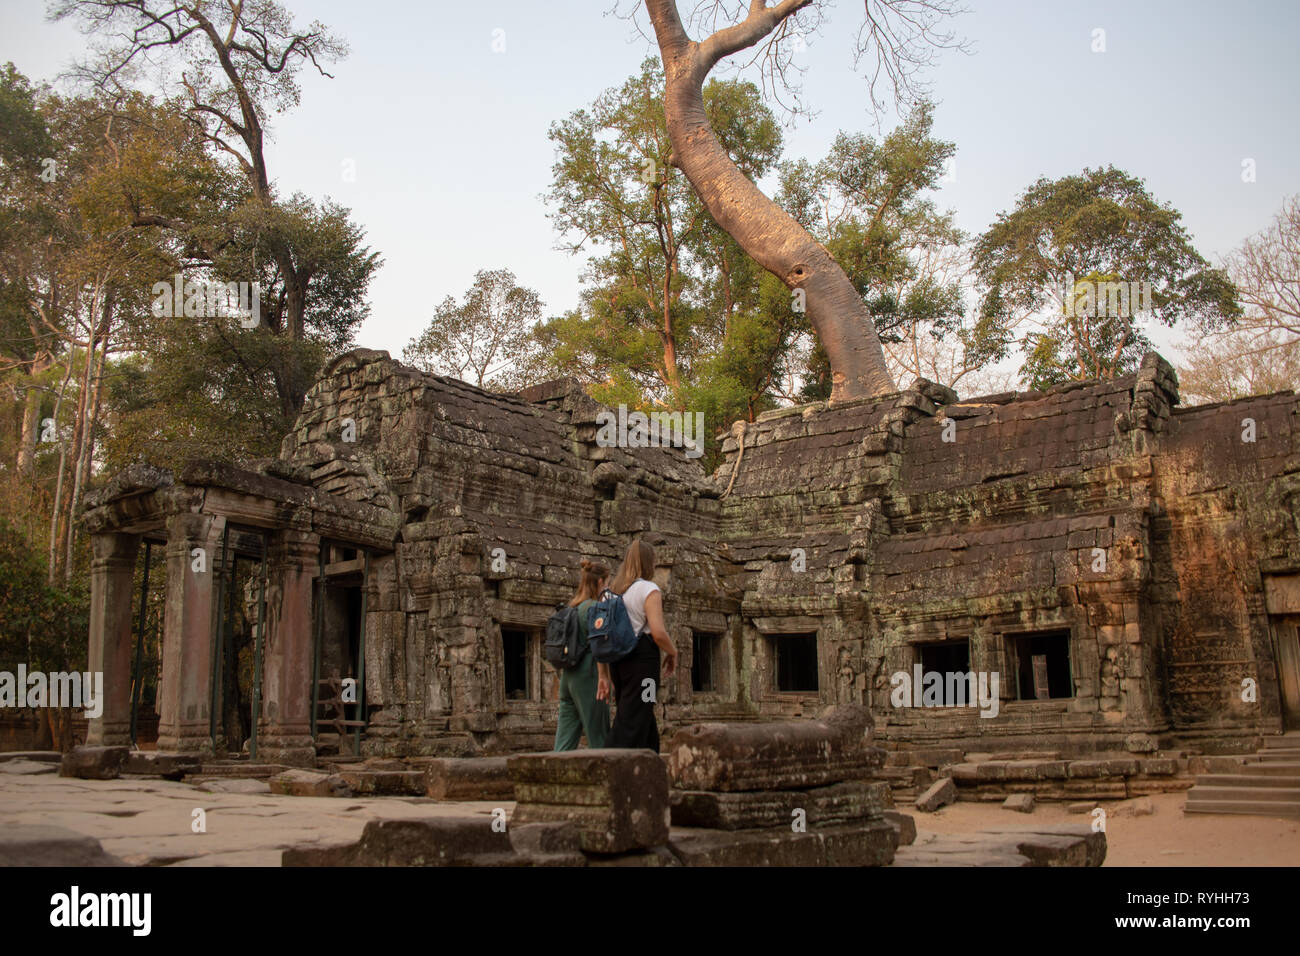 Angkor wat ,Siem Reap, Cambodia, Thursday 14th March 2019. Siem reap , Cambodia weather: The hot dry spell continues with highs of 36 degrees and lows of 26 degrees. Tourists visiting the temples of the Angkor wat in early morning to avoid the extreme heat later in the day. Angkor Wat is a temple complex in Cambodia and one of the largest religious monuments in the world, on a site measuring 162.6 hectares. Credit: WansfordPhoto/Alamy Live News Stock Photo